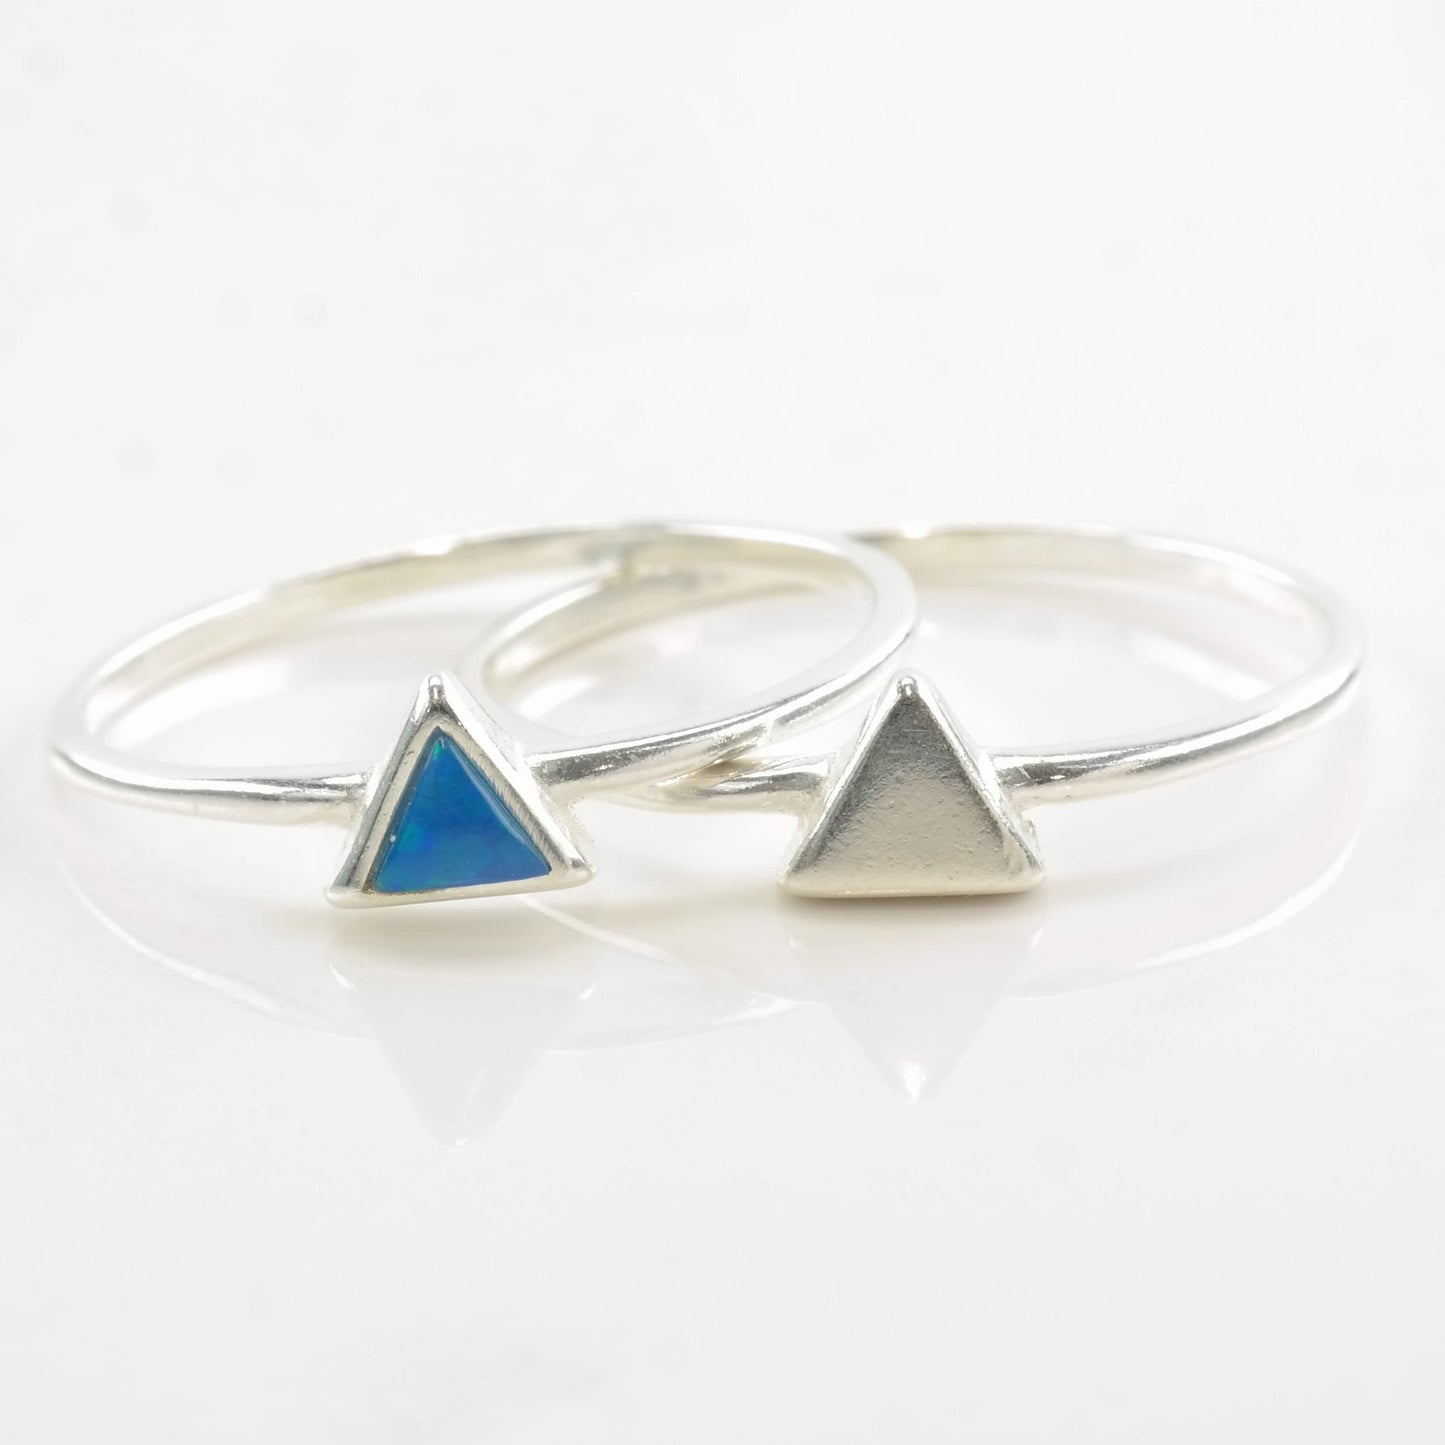 Vintage Minimalist Silver Ring Lab Opal Triangle Sterling Blue Size 6-8